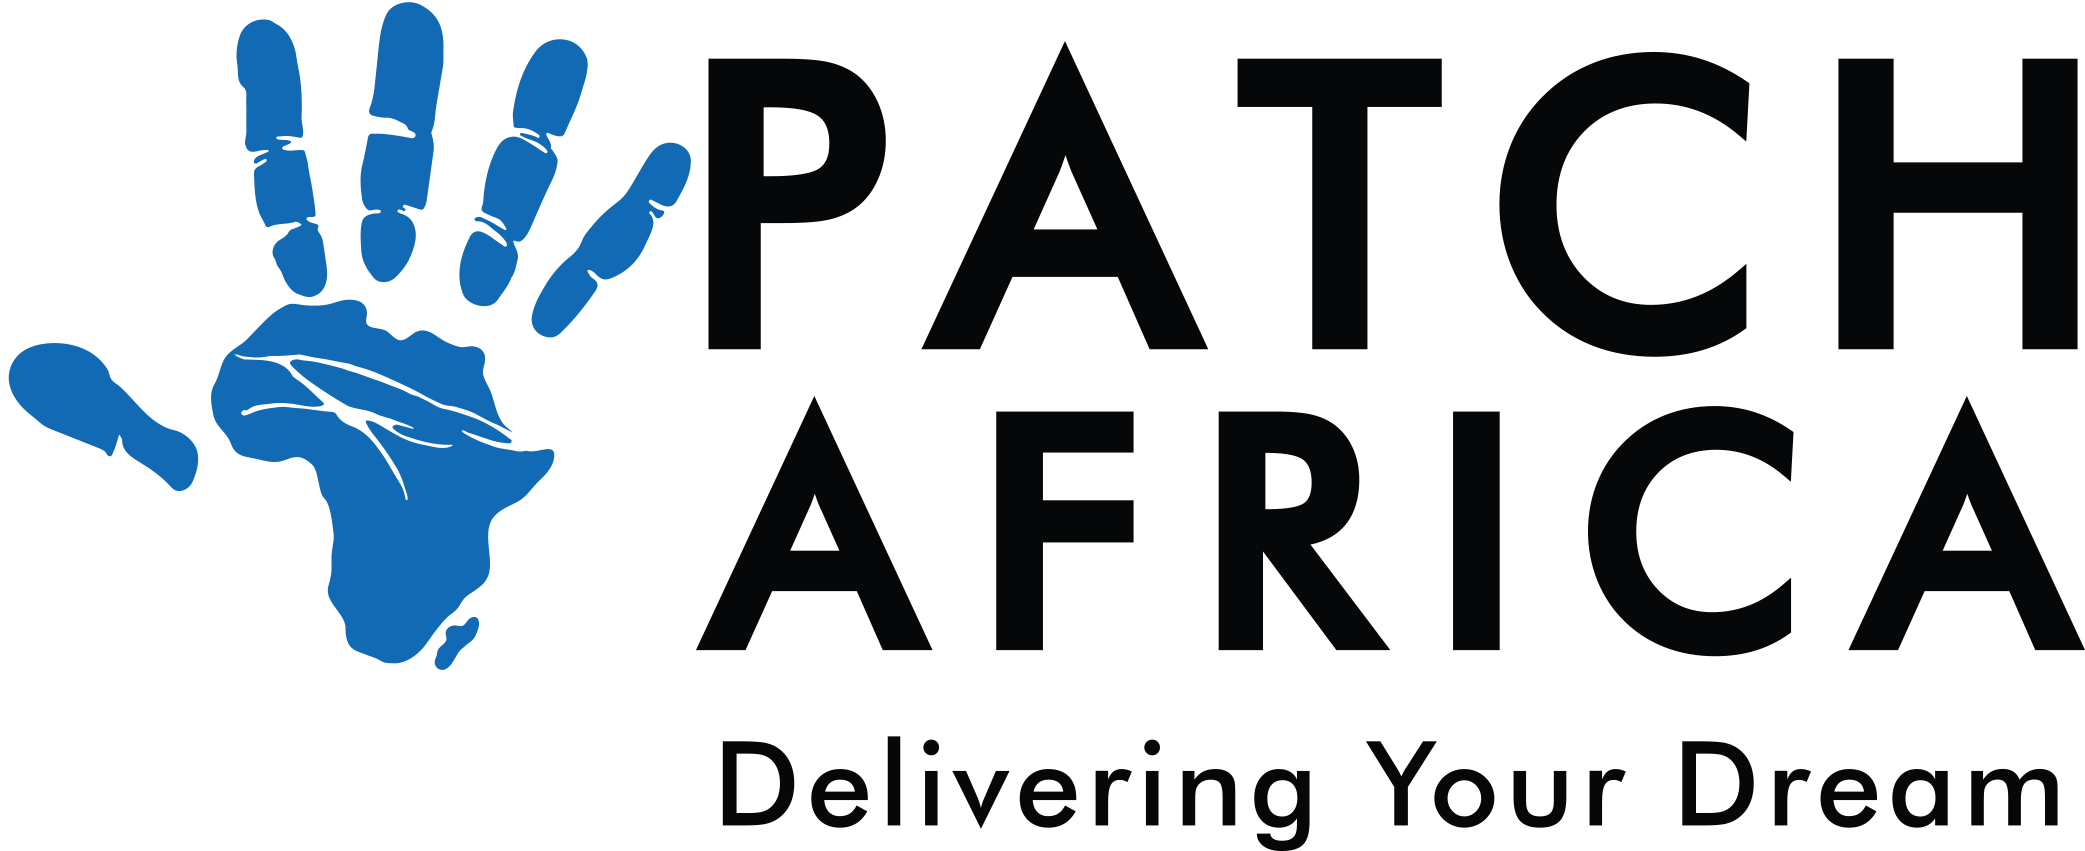 Patch Africa